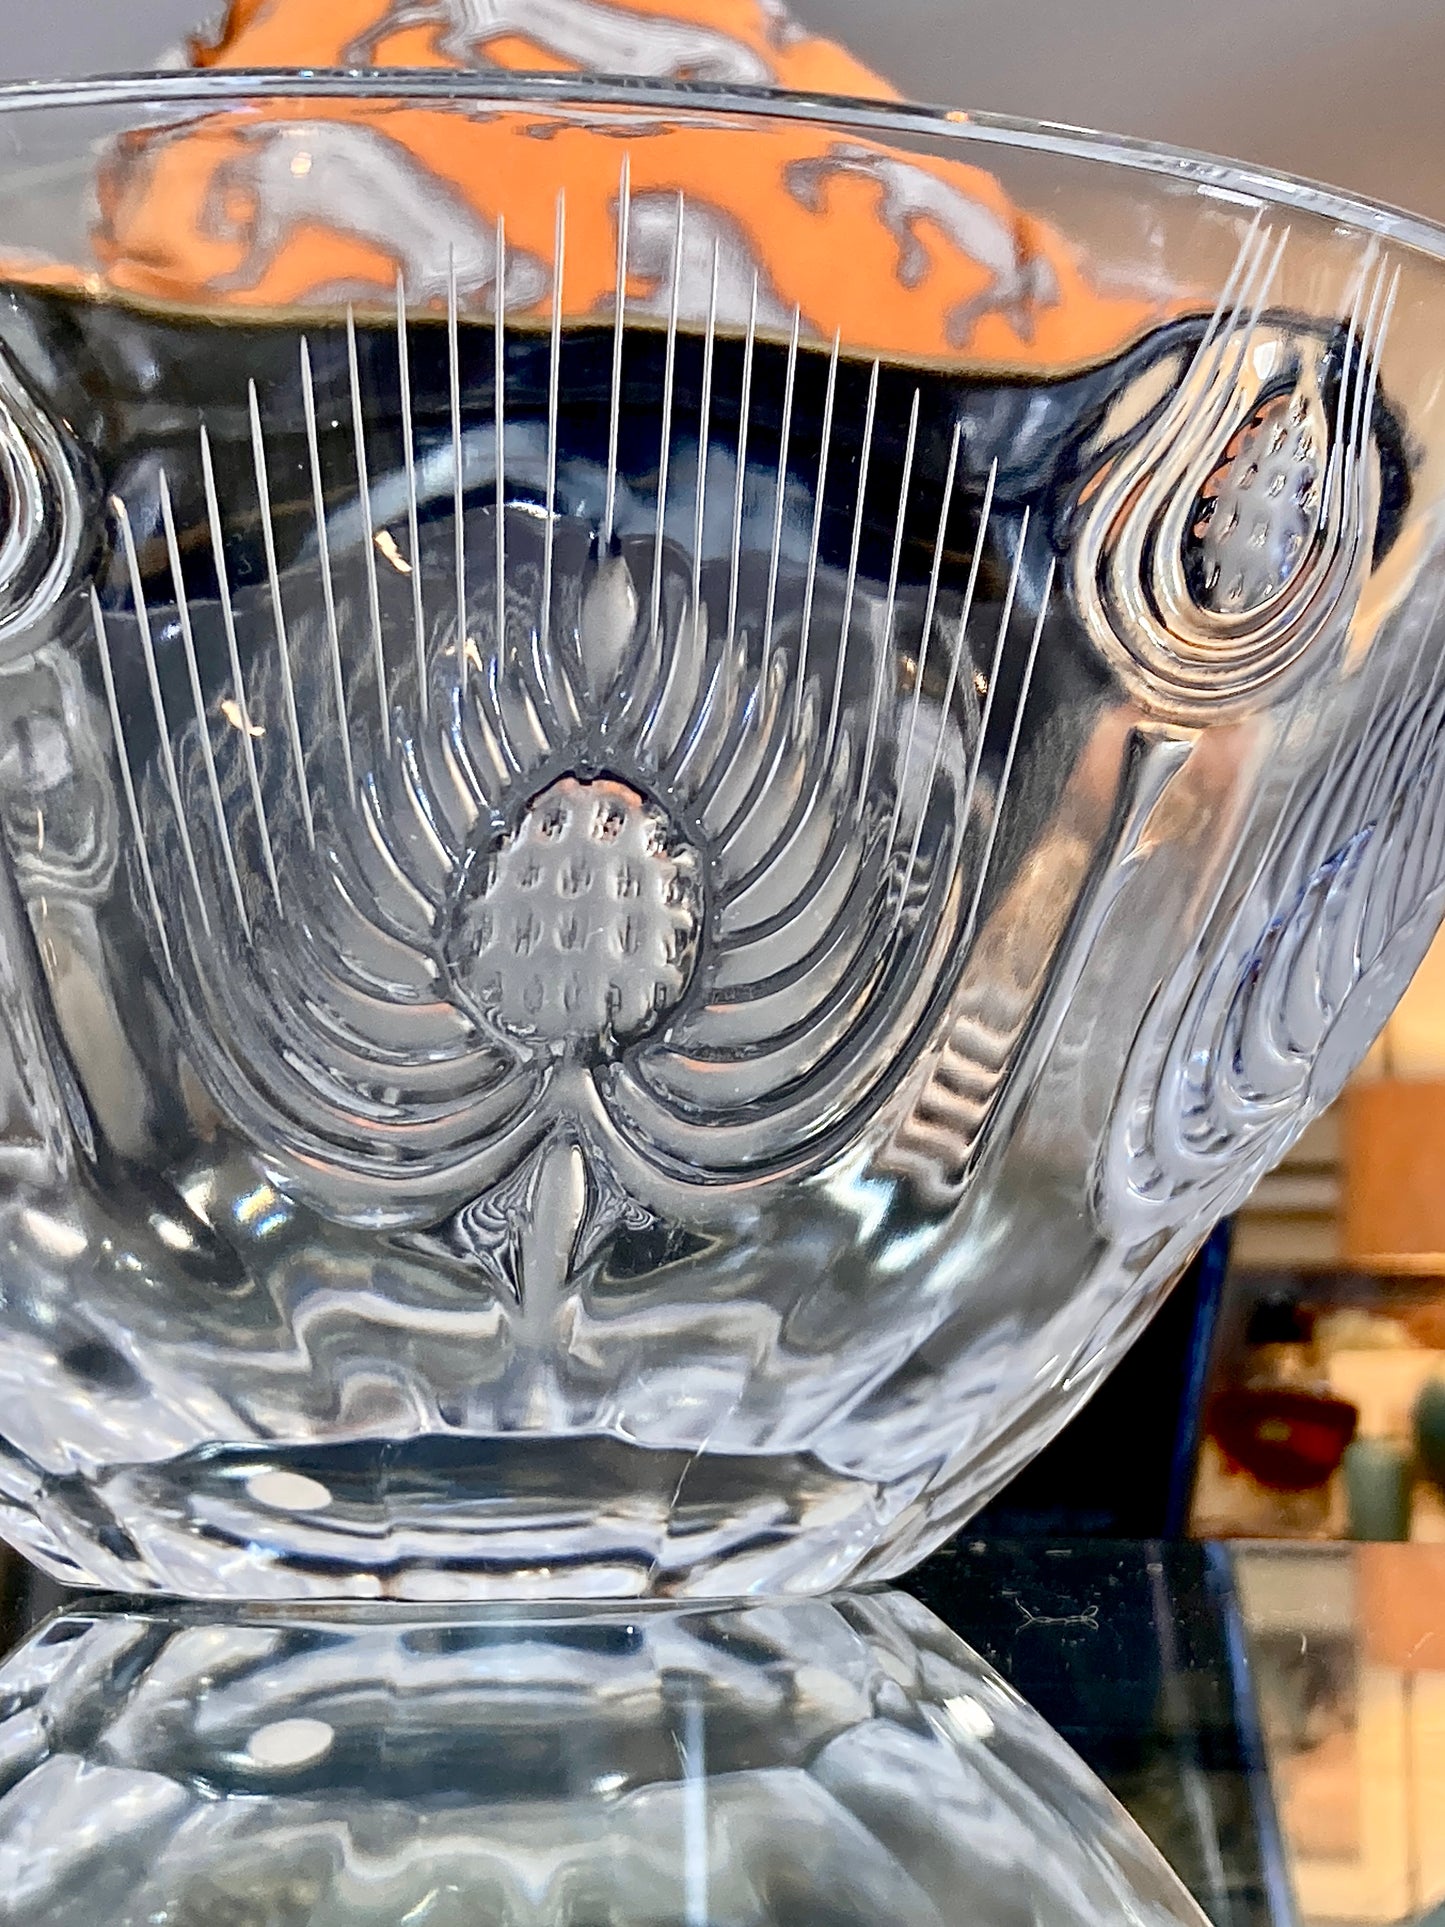 Vintage 1960s Lalique Clear Crystal Thistle Pattern Art Deco Style Bowl